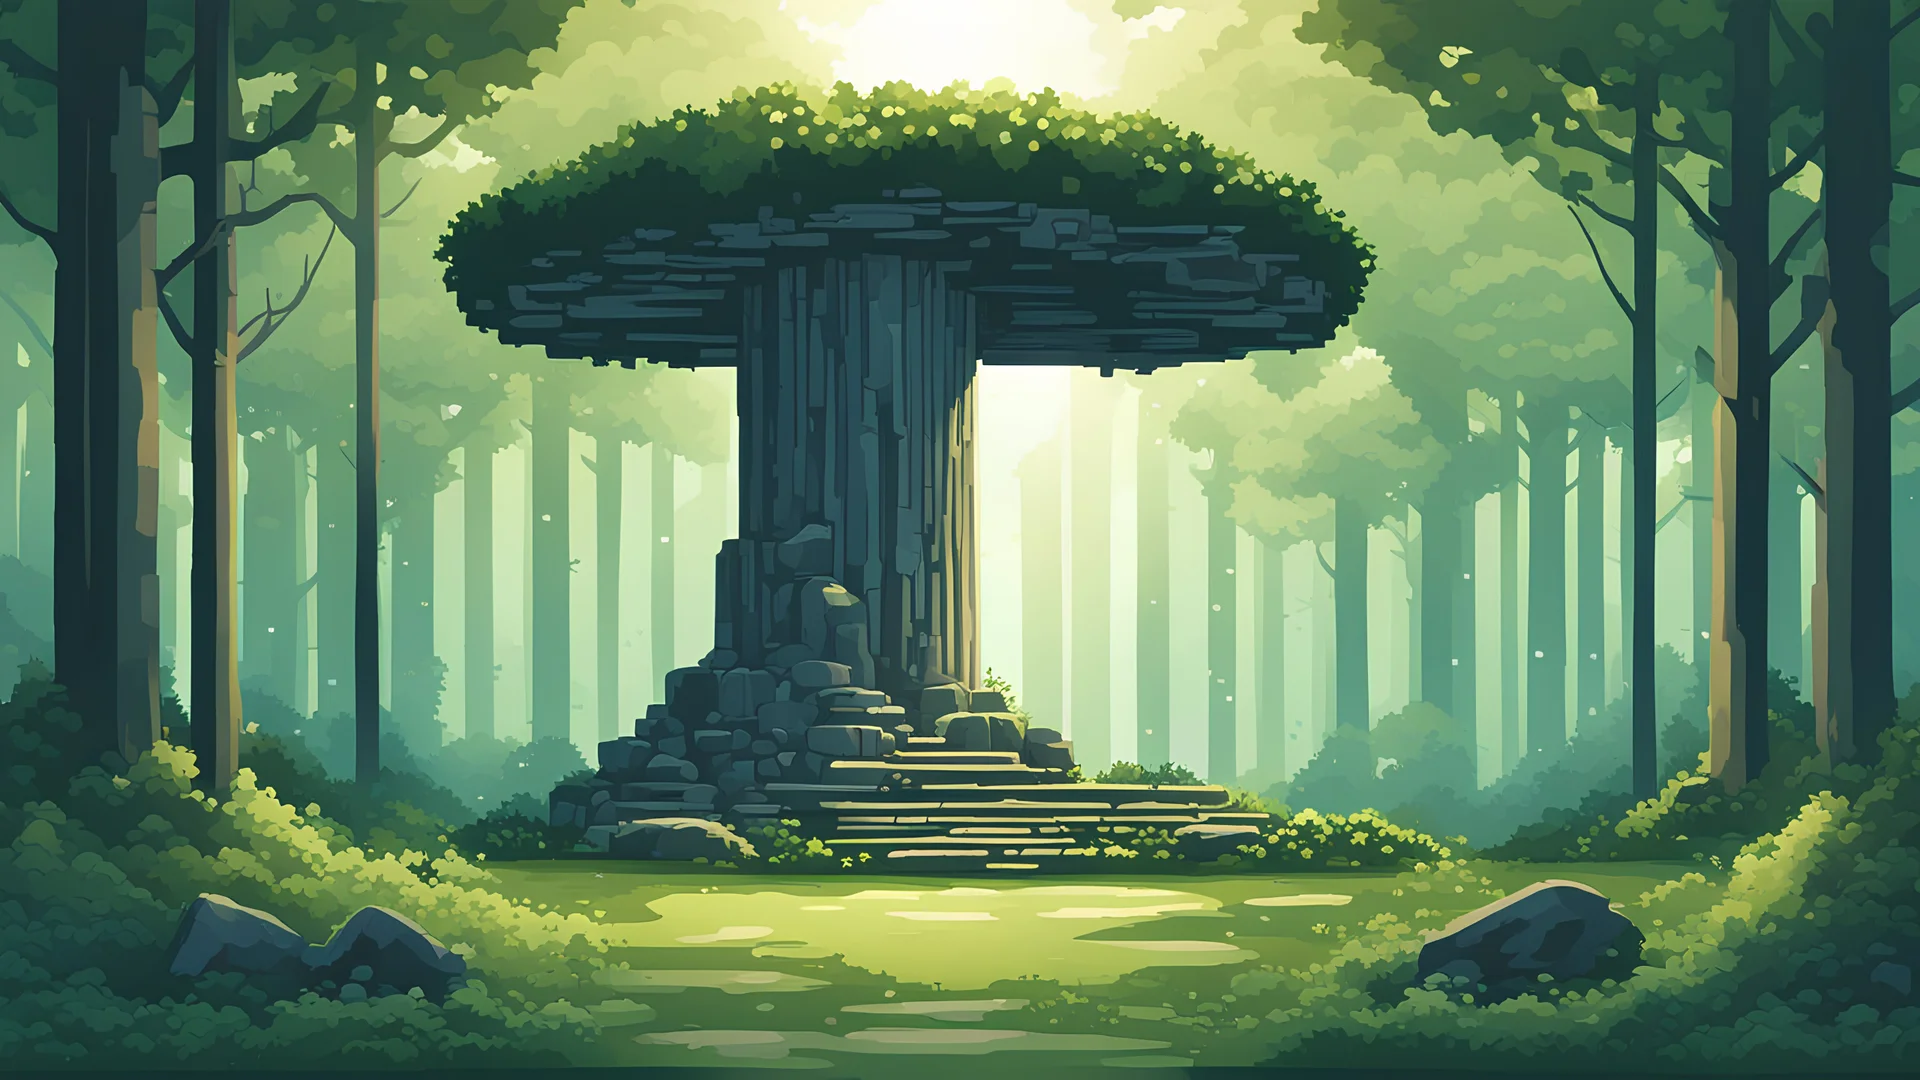 The poster presents a serene forest scene in minimalist pixel art, capturing the essence of the Celtic landscape. A solitary dolmen stands amidst a sea of lush green trees, its ancient stones rendered in simple yet evocative detail. Shafts of sunlight filter through the canopy, casting dappled patterns on the forest floor.